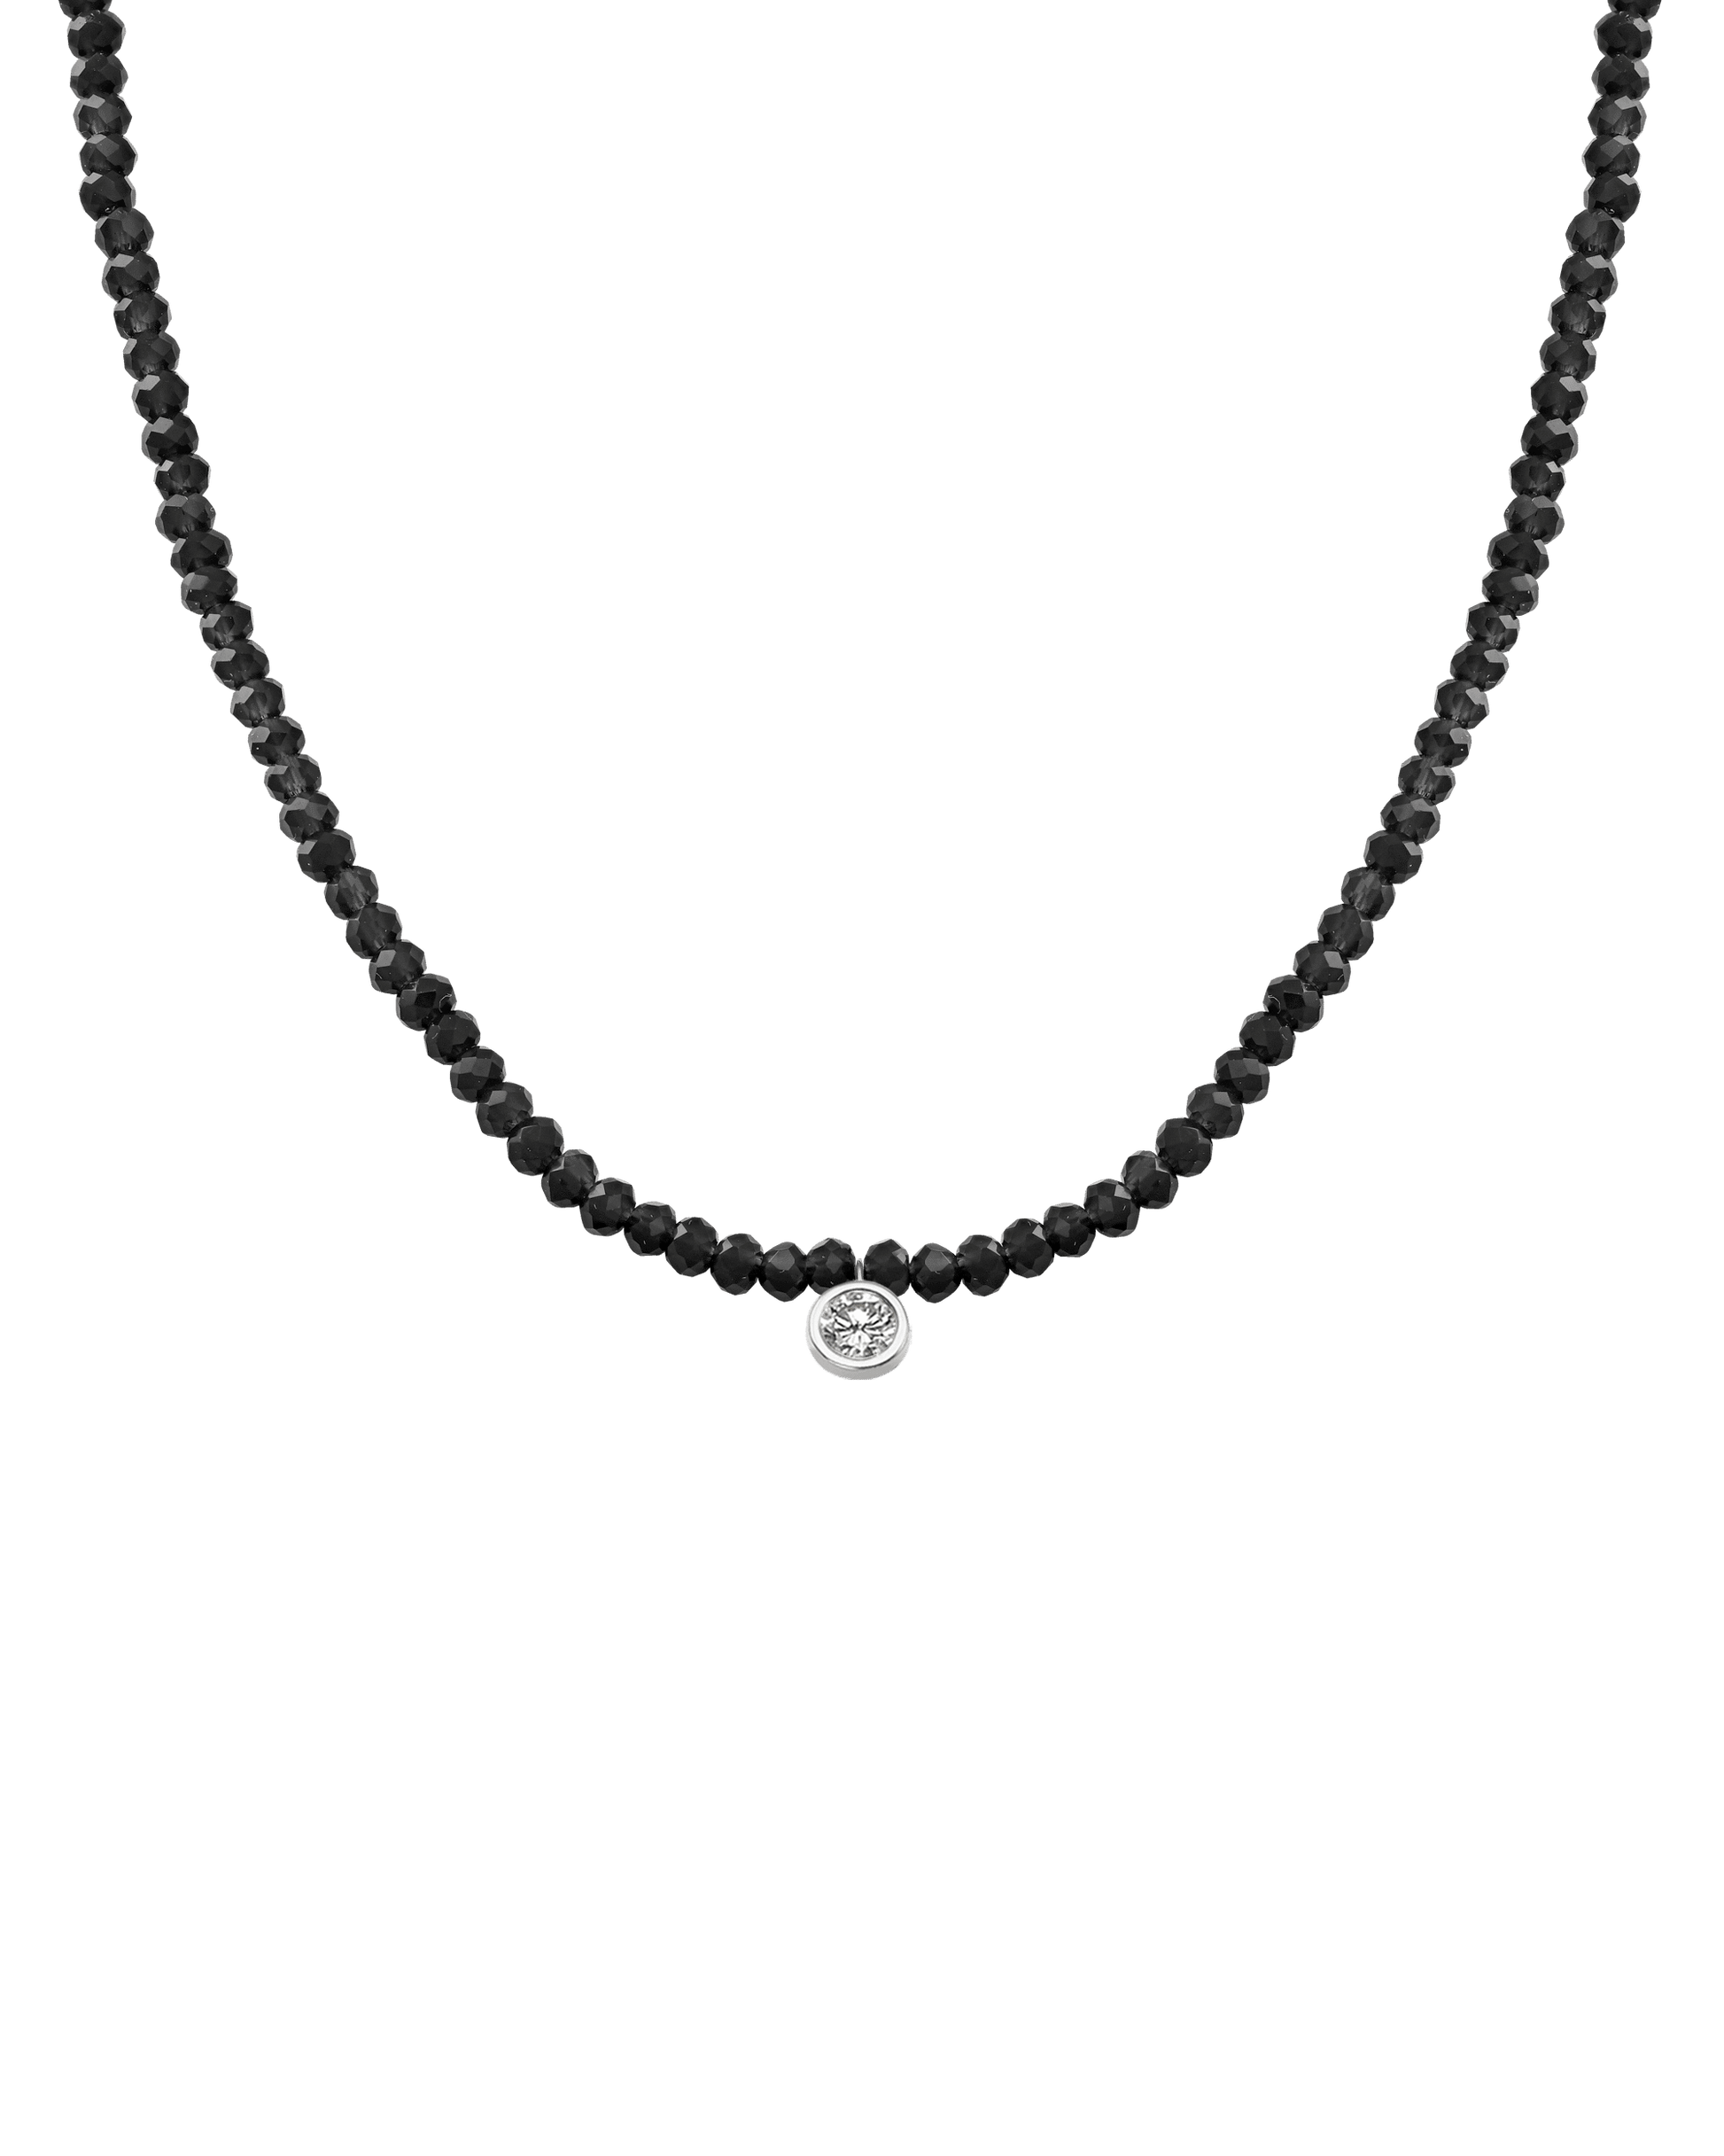 Apatite Gemstone & Diamond Necklace - 14K White Gold Necklaces 14K Solid Gold Glass Beads Black Spinnel Extra Large: 0.20ct 14"